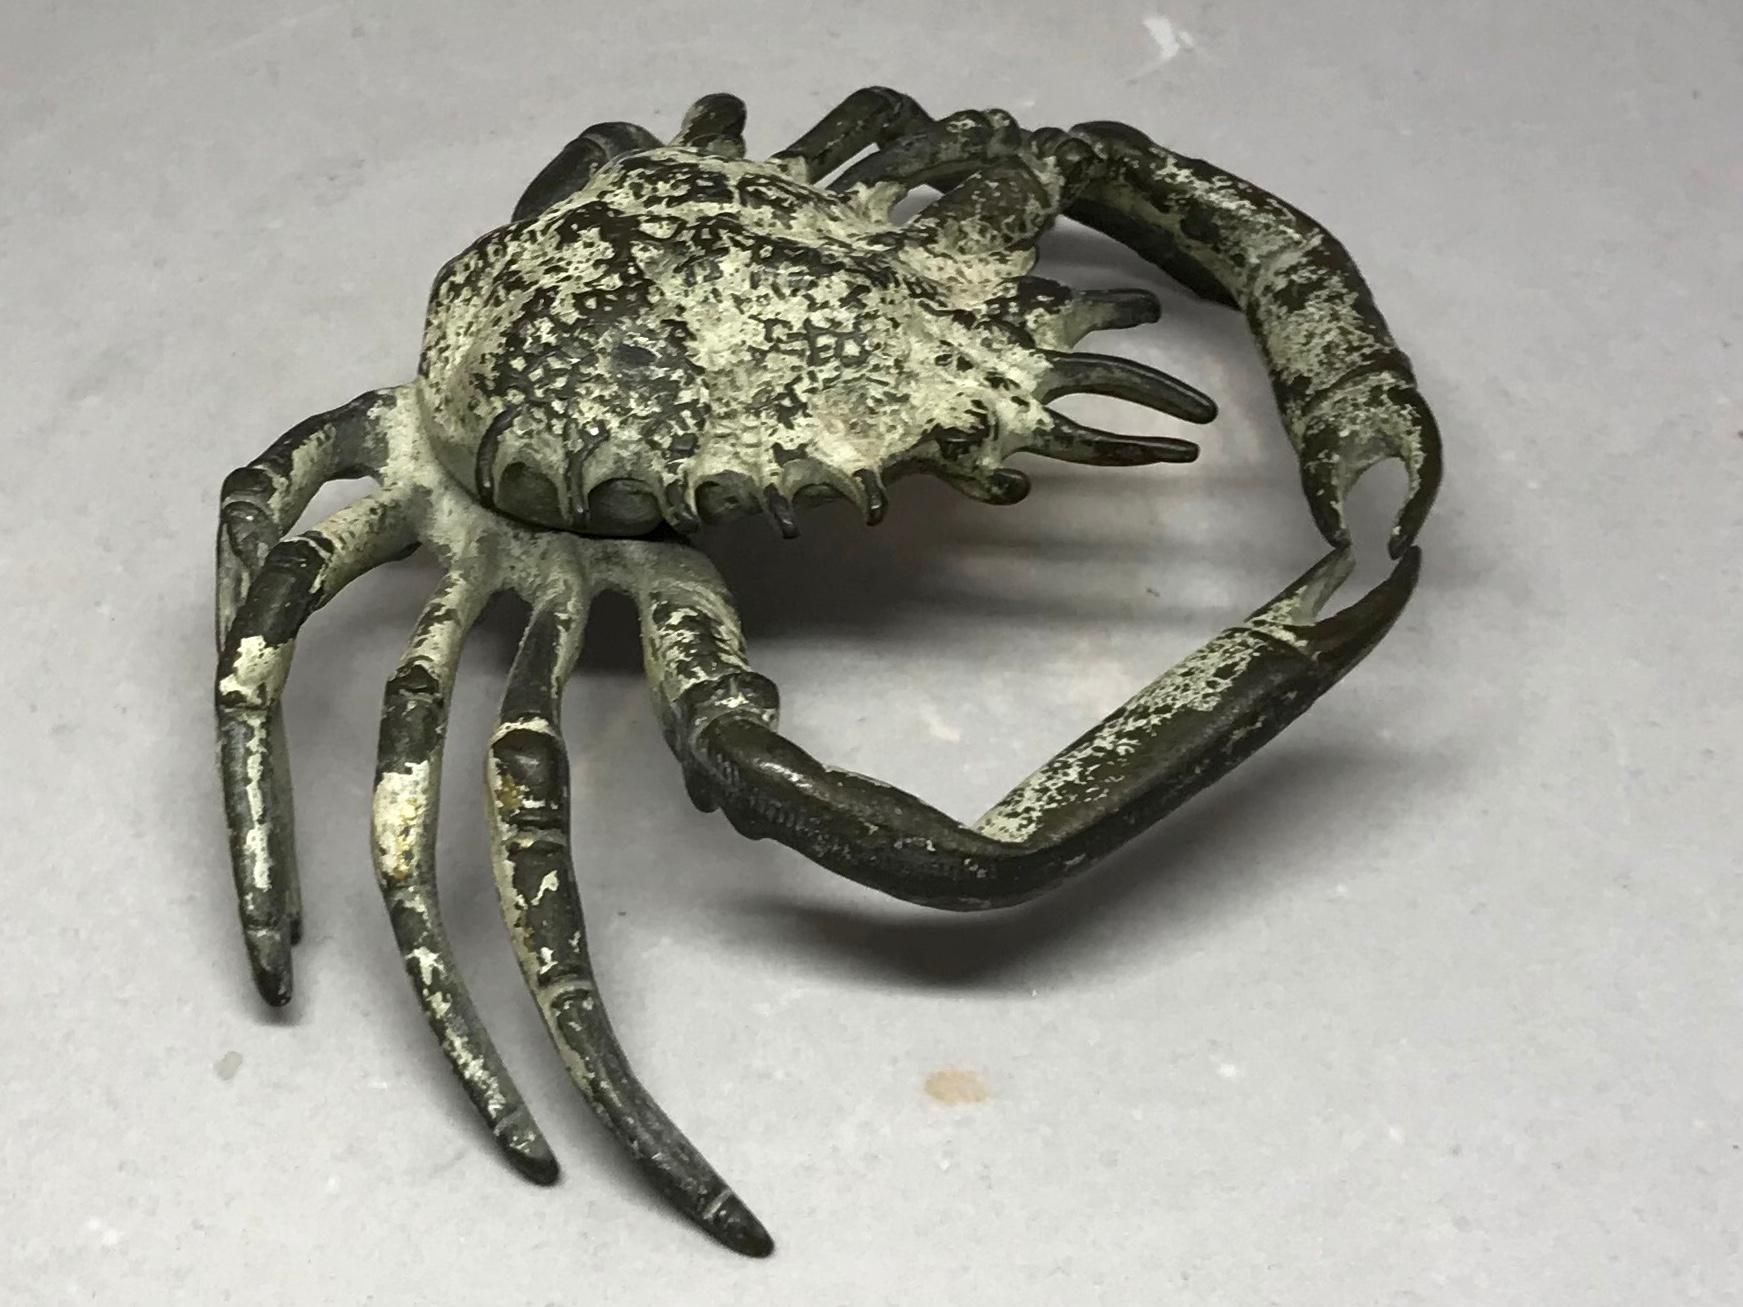 Italian life-size bronze crab. Antique Neapolitan crab in patinated bronze, Italy, early 20th century.
Dimensions: 6.75